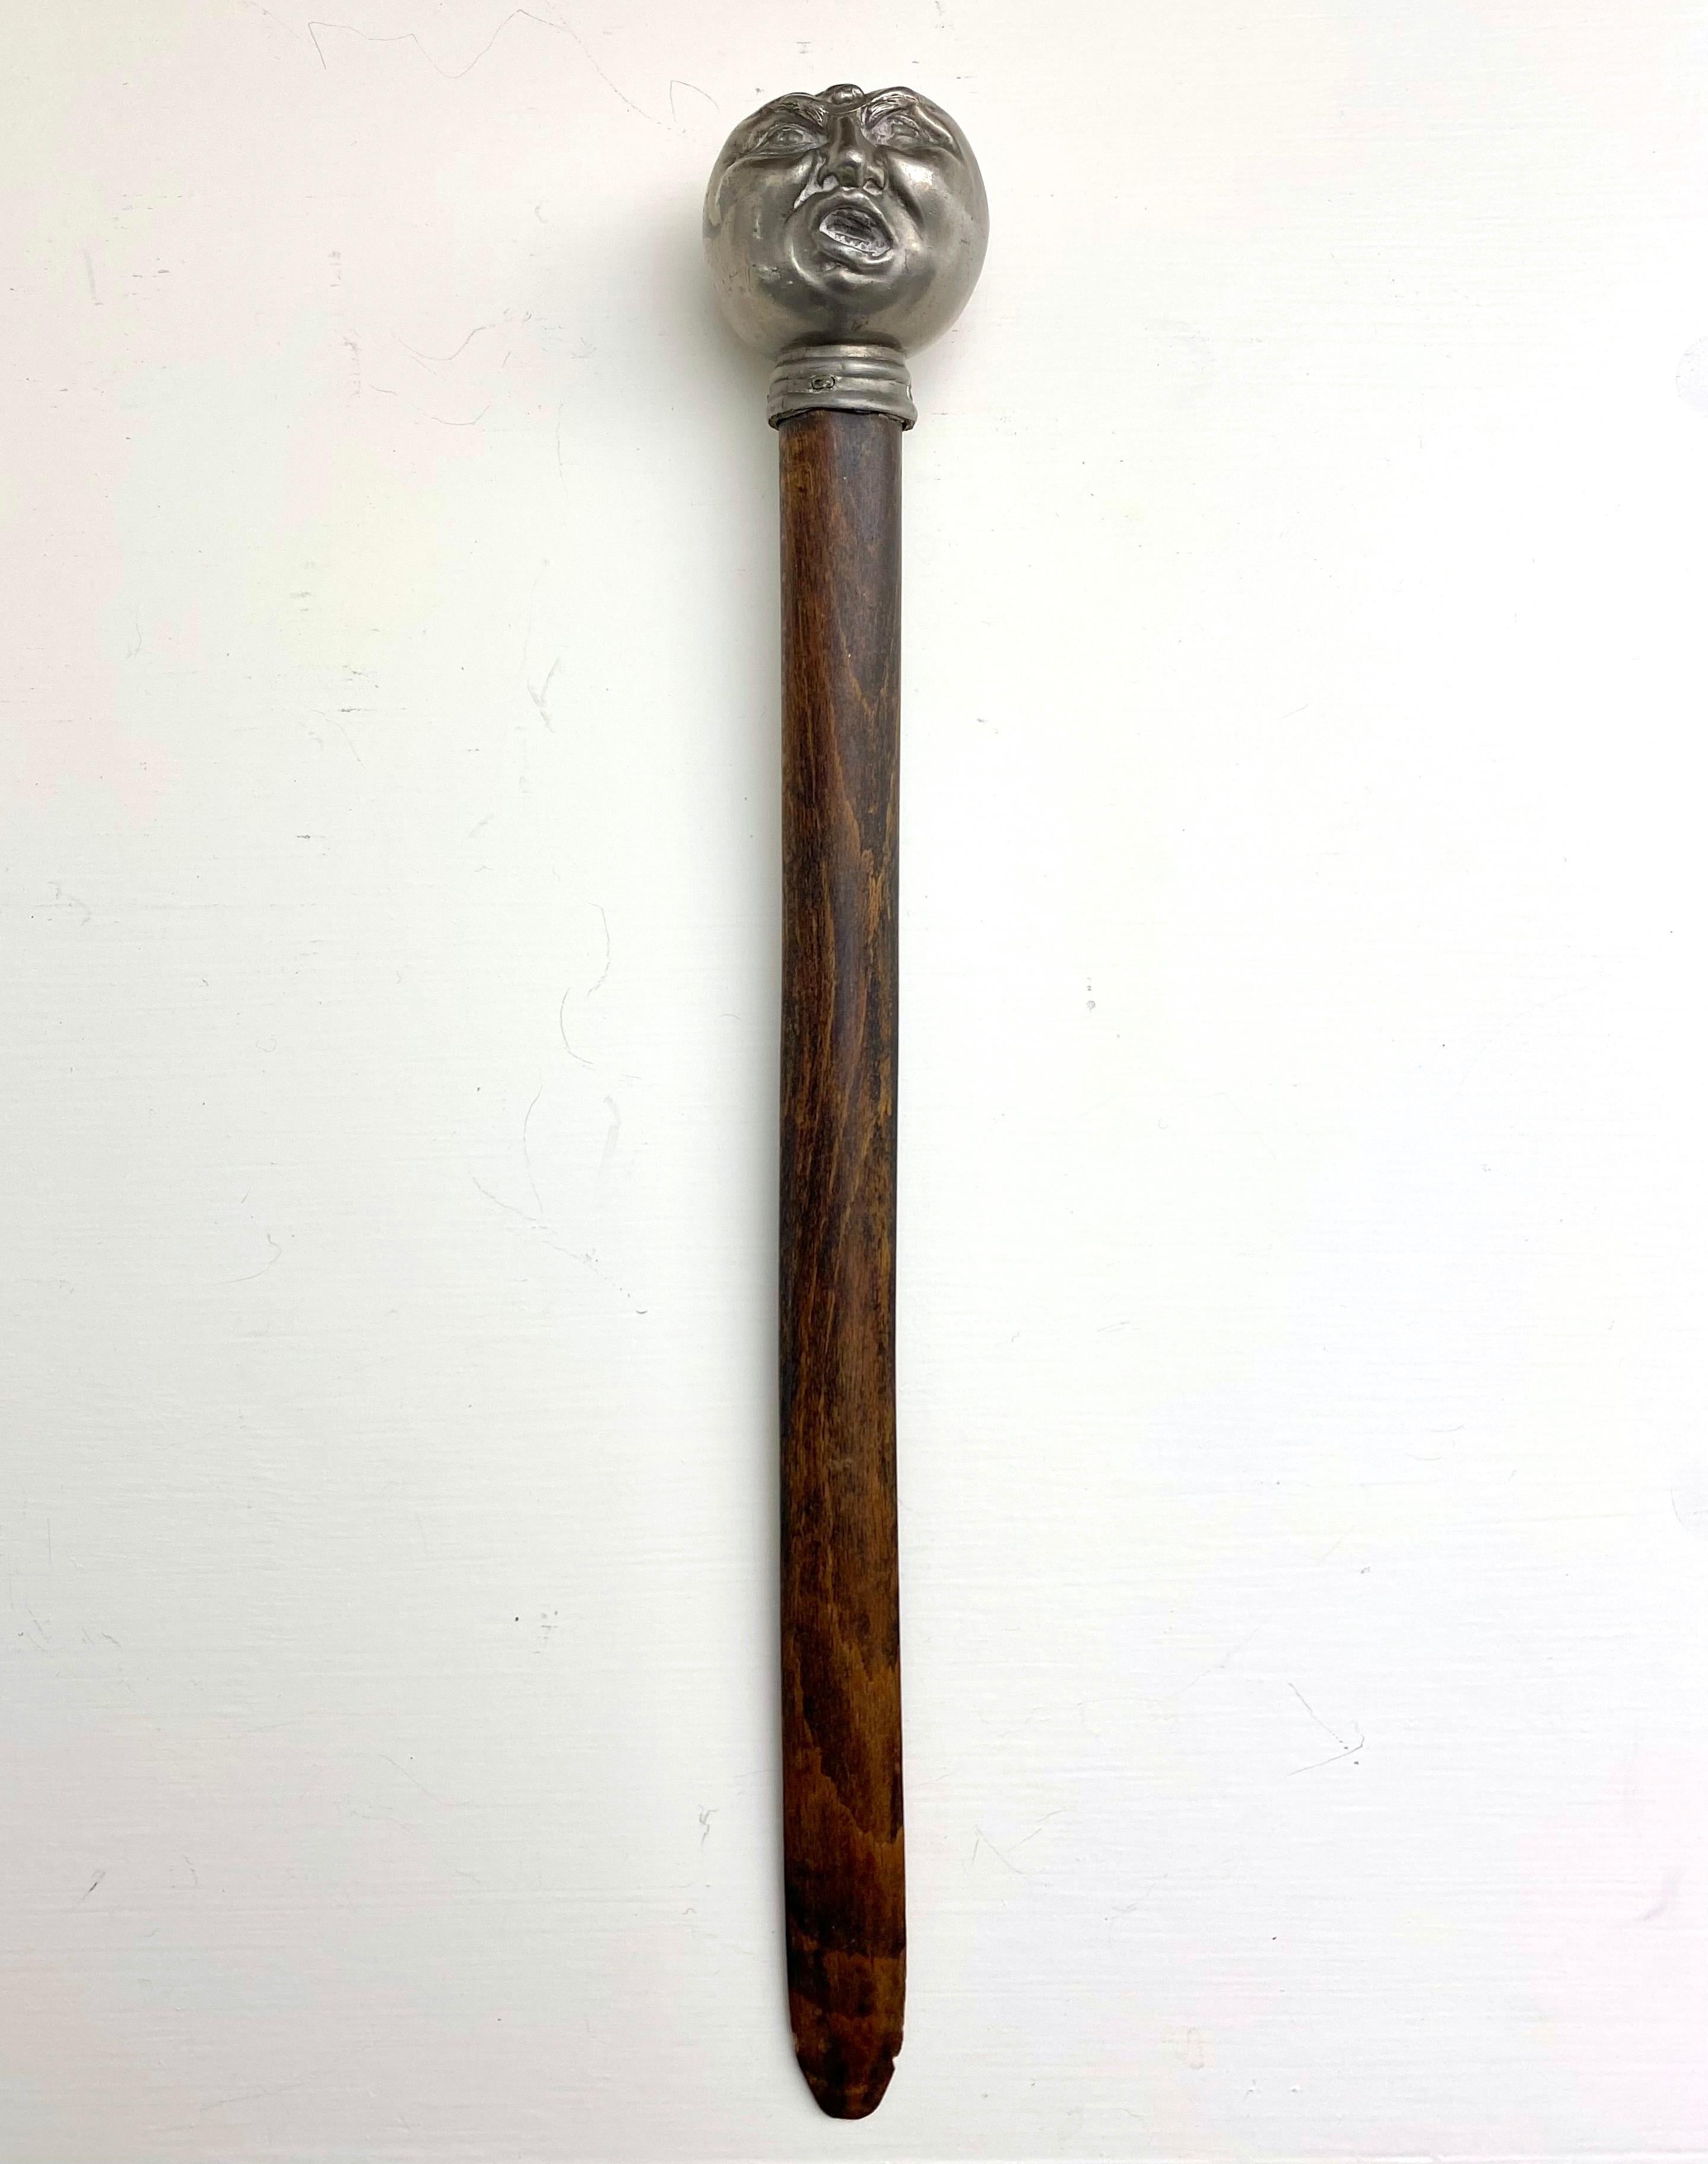 Fun and Whimsical antique figural letter opener of a man with a fly on top of his head. And that face, truly a great expression and a piece of sculptural art! Most likely pewter or silver plate with a wooden opener. Great collectors item for home